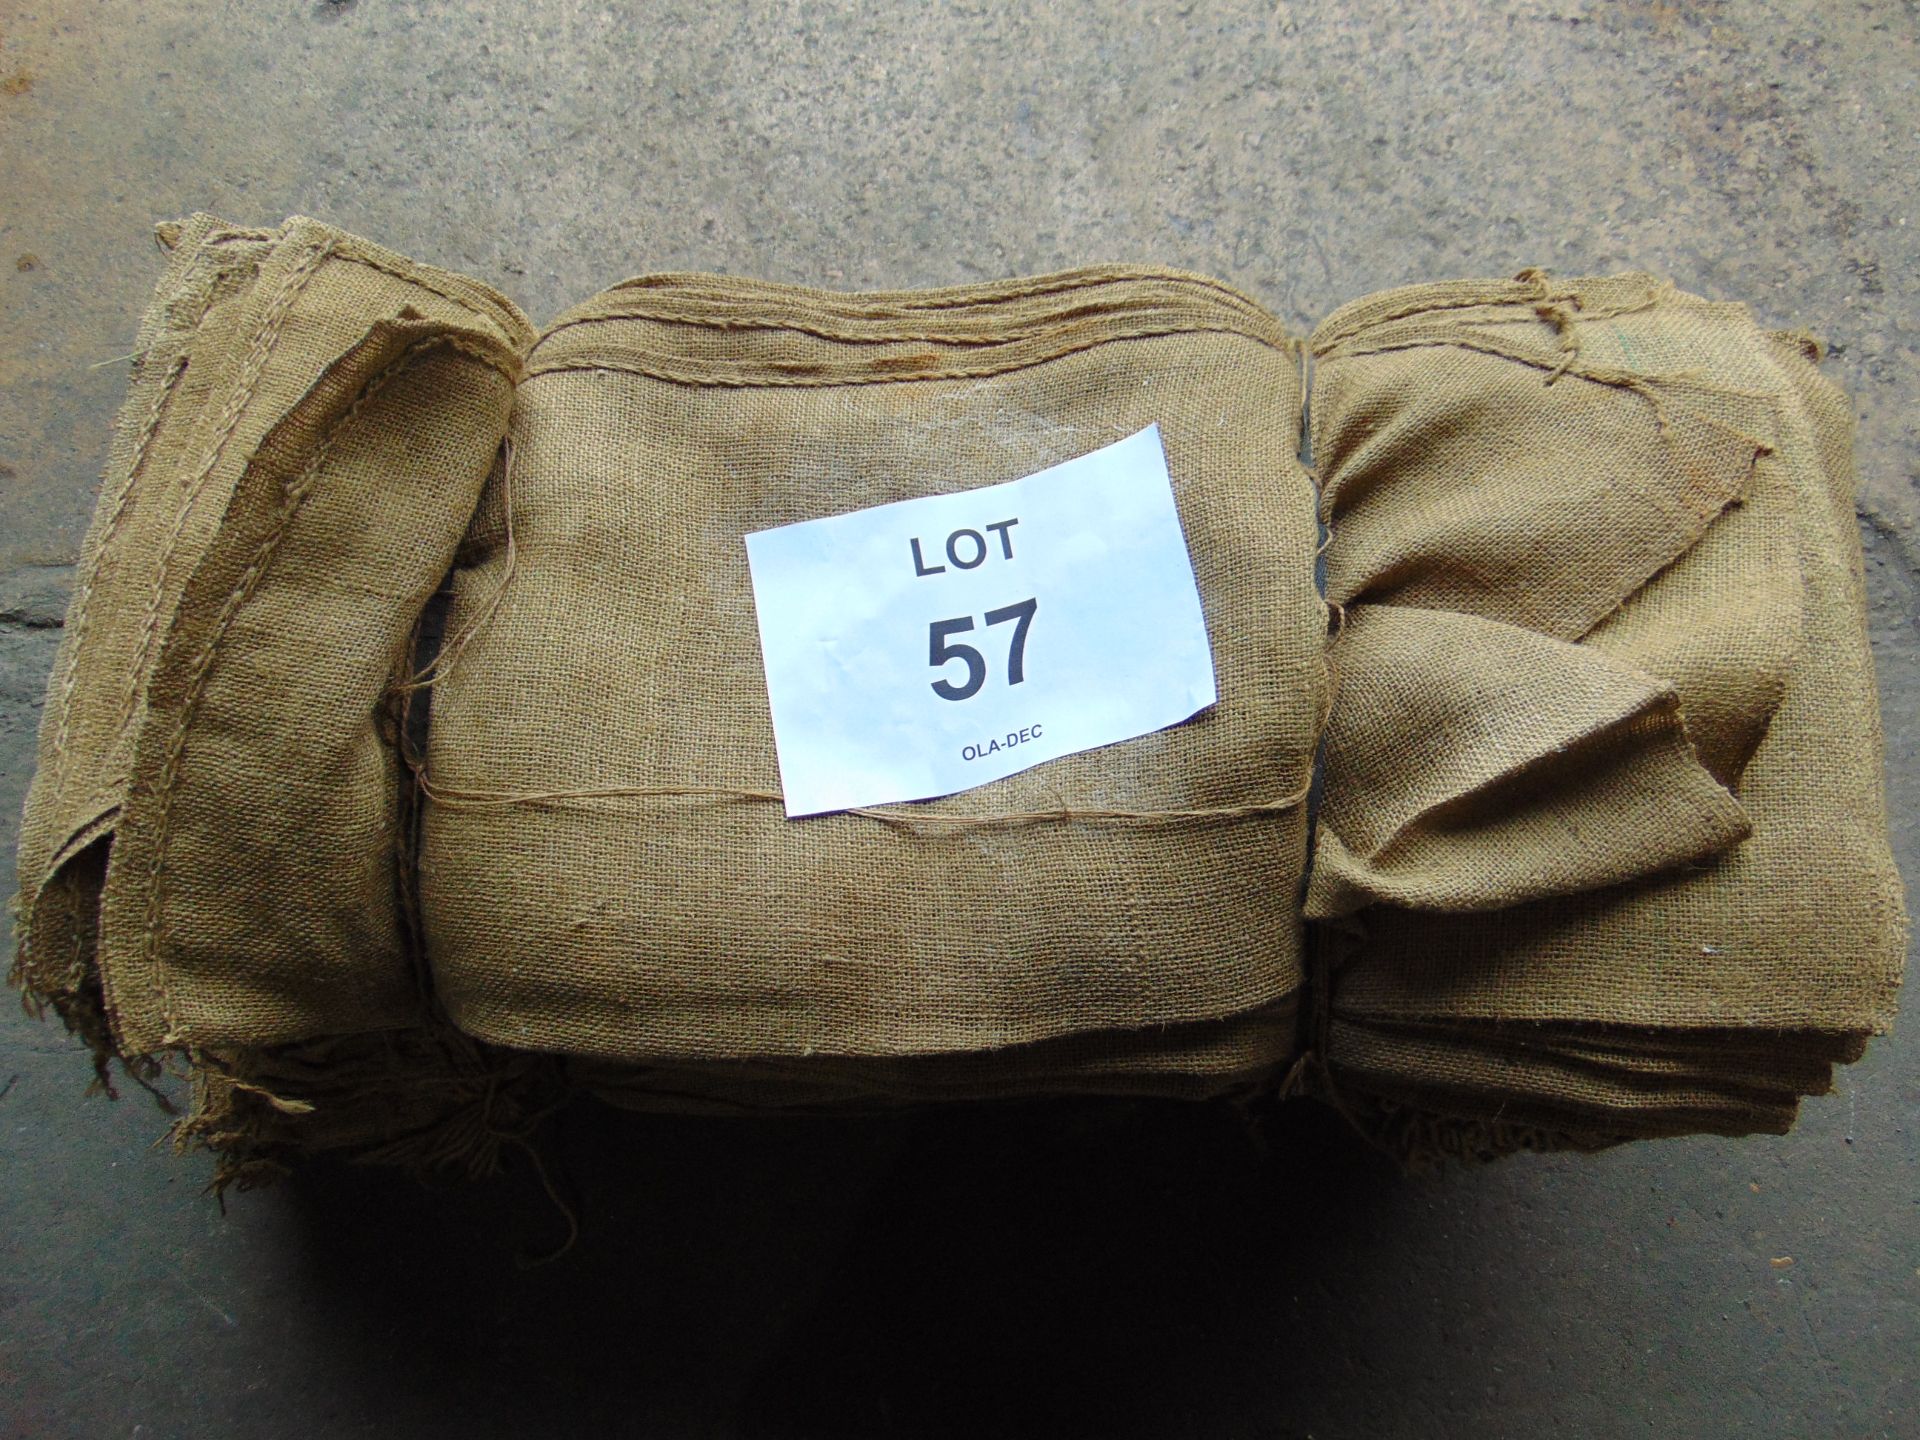 2 x Packs of Standard British Army Hessian Sand Bags Approx 150